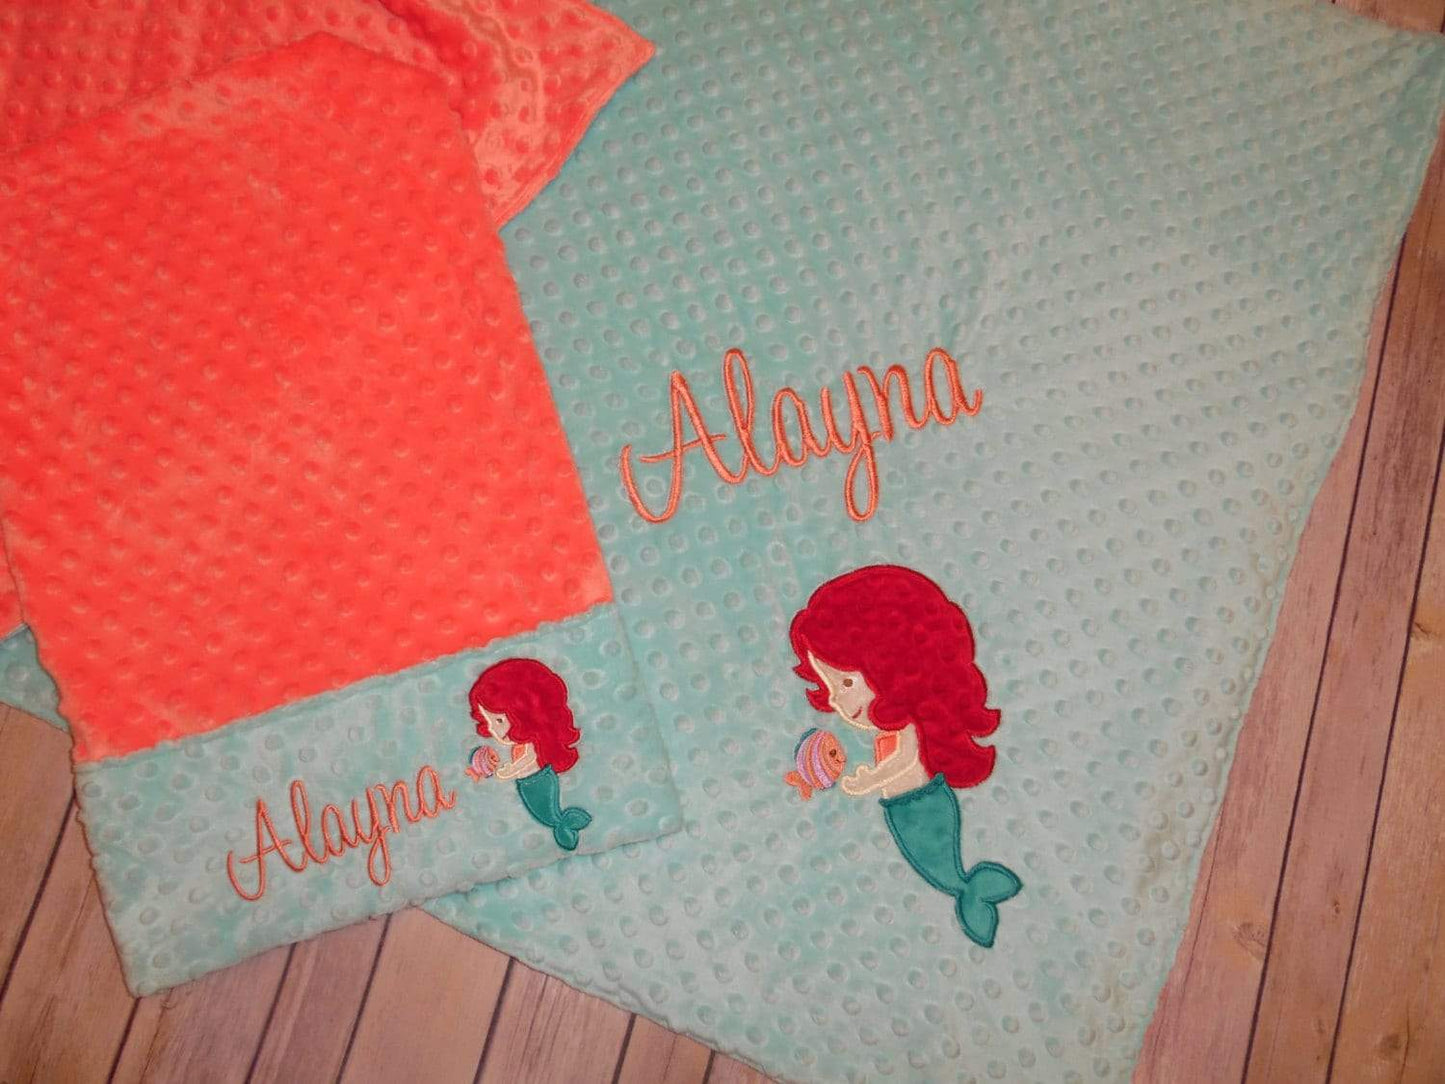 Mermaid Nap Set - Personalized Minky Blanket and Pillowcase with embroidered Mermaid - Travel or Standard Size